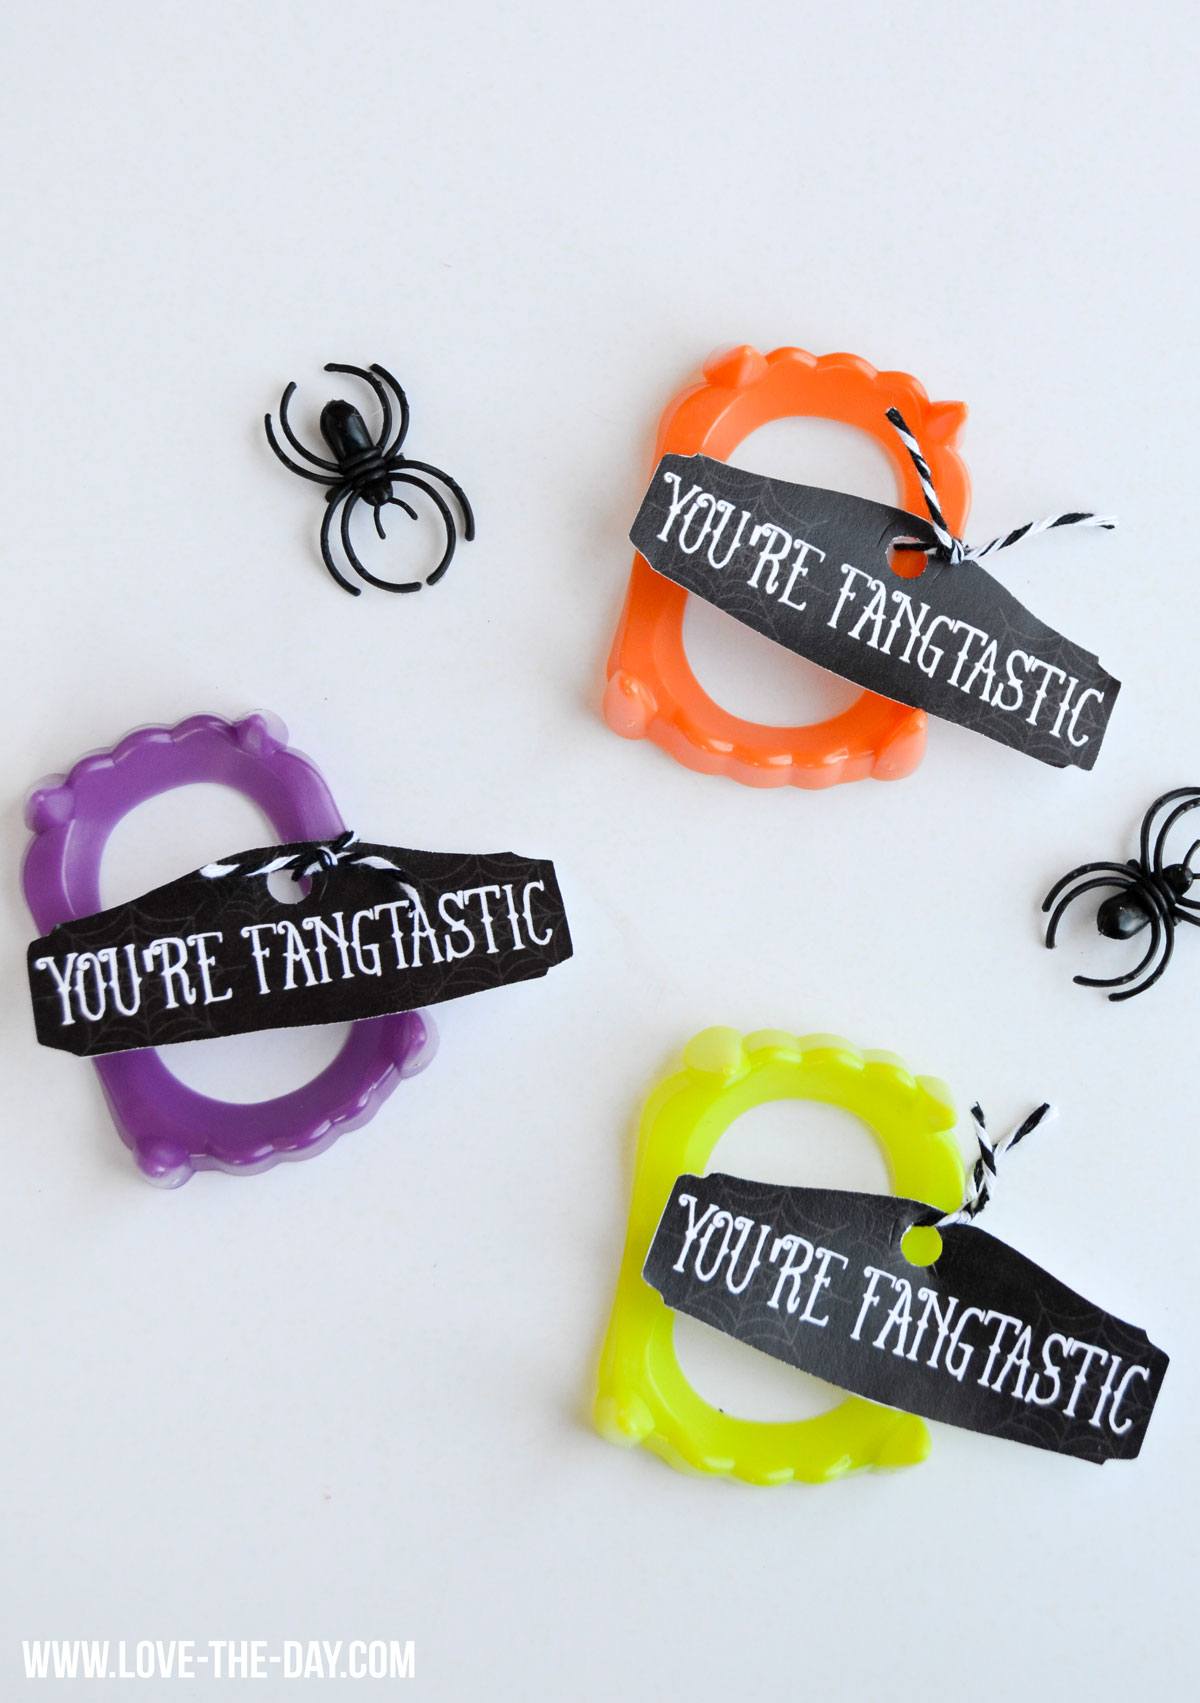 FANGtastic Halloween Idea & Free Printable by Love The Day